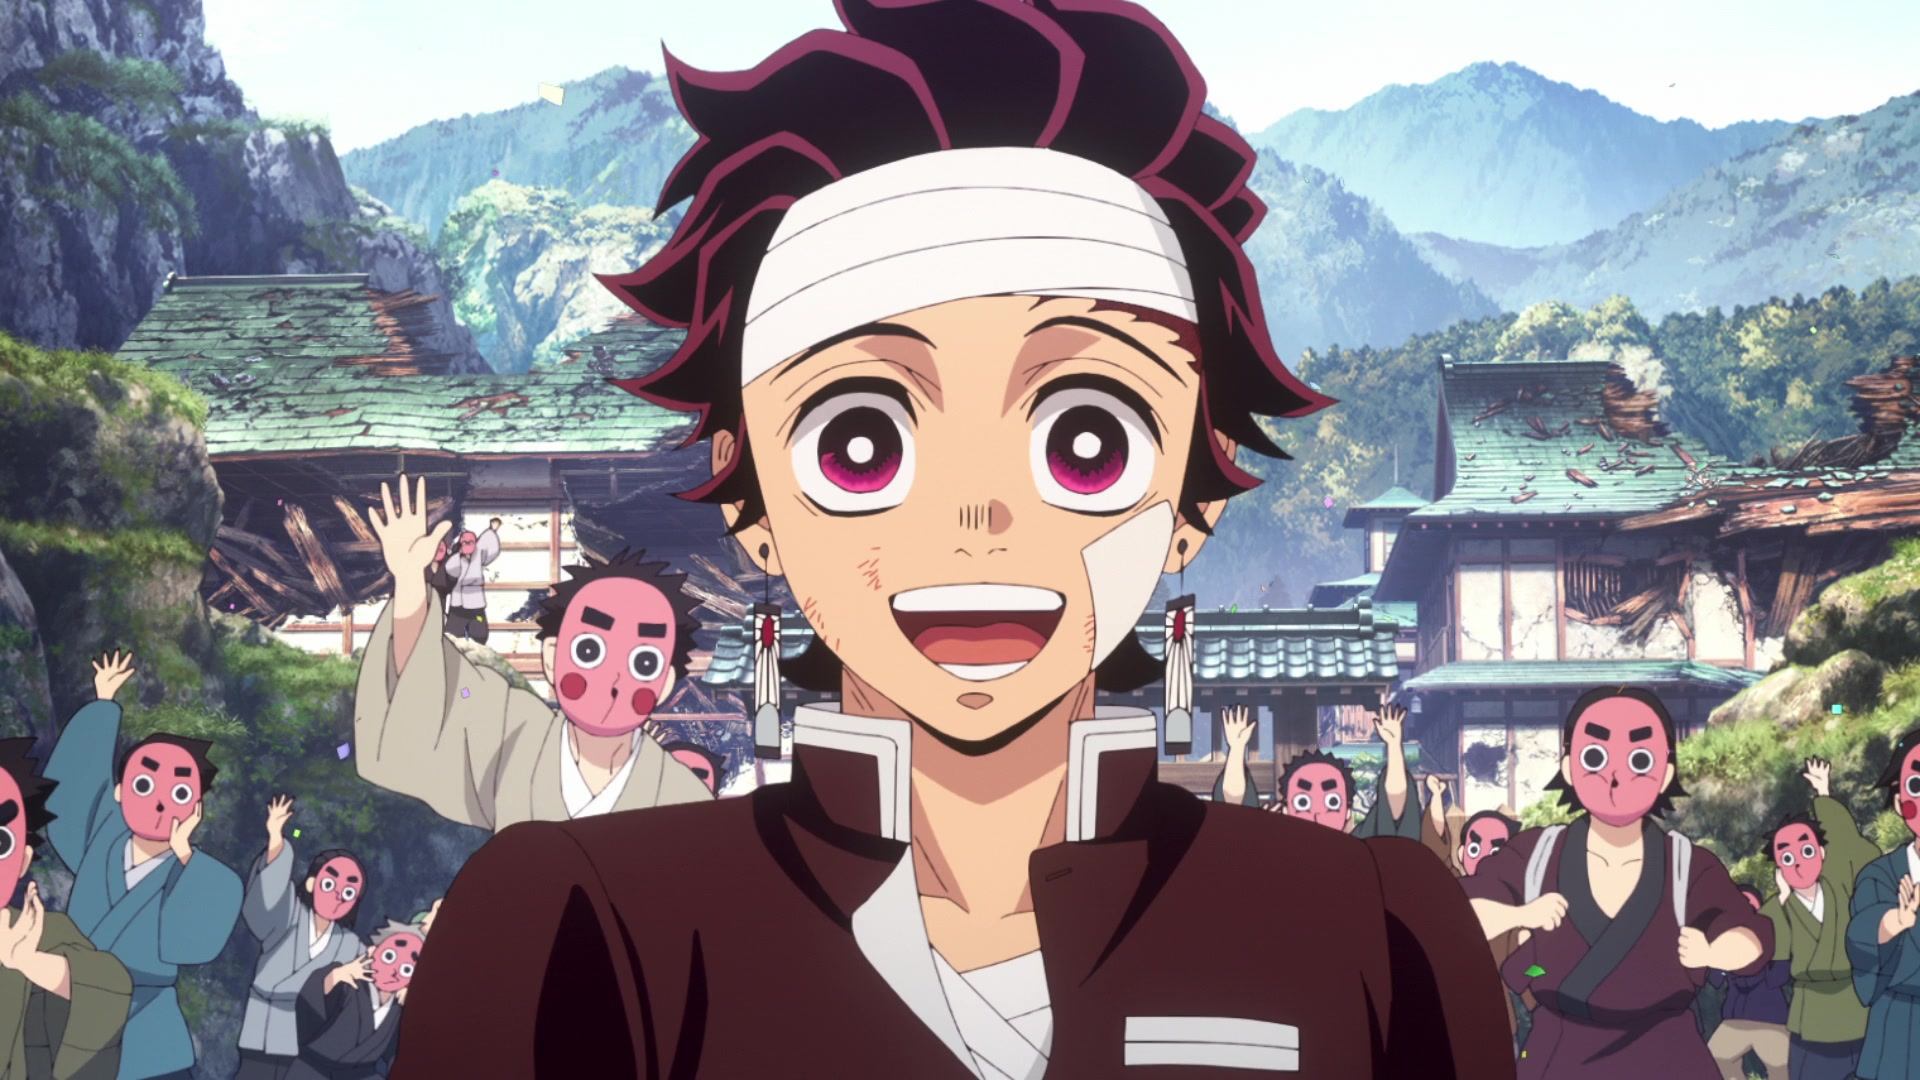 Tanjiro smiling with bandages on his brow and cheek in front of a group of villagers with masks on in Demon Slayer Kimetsu no Yaiba.